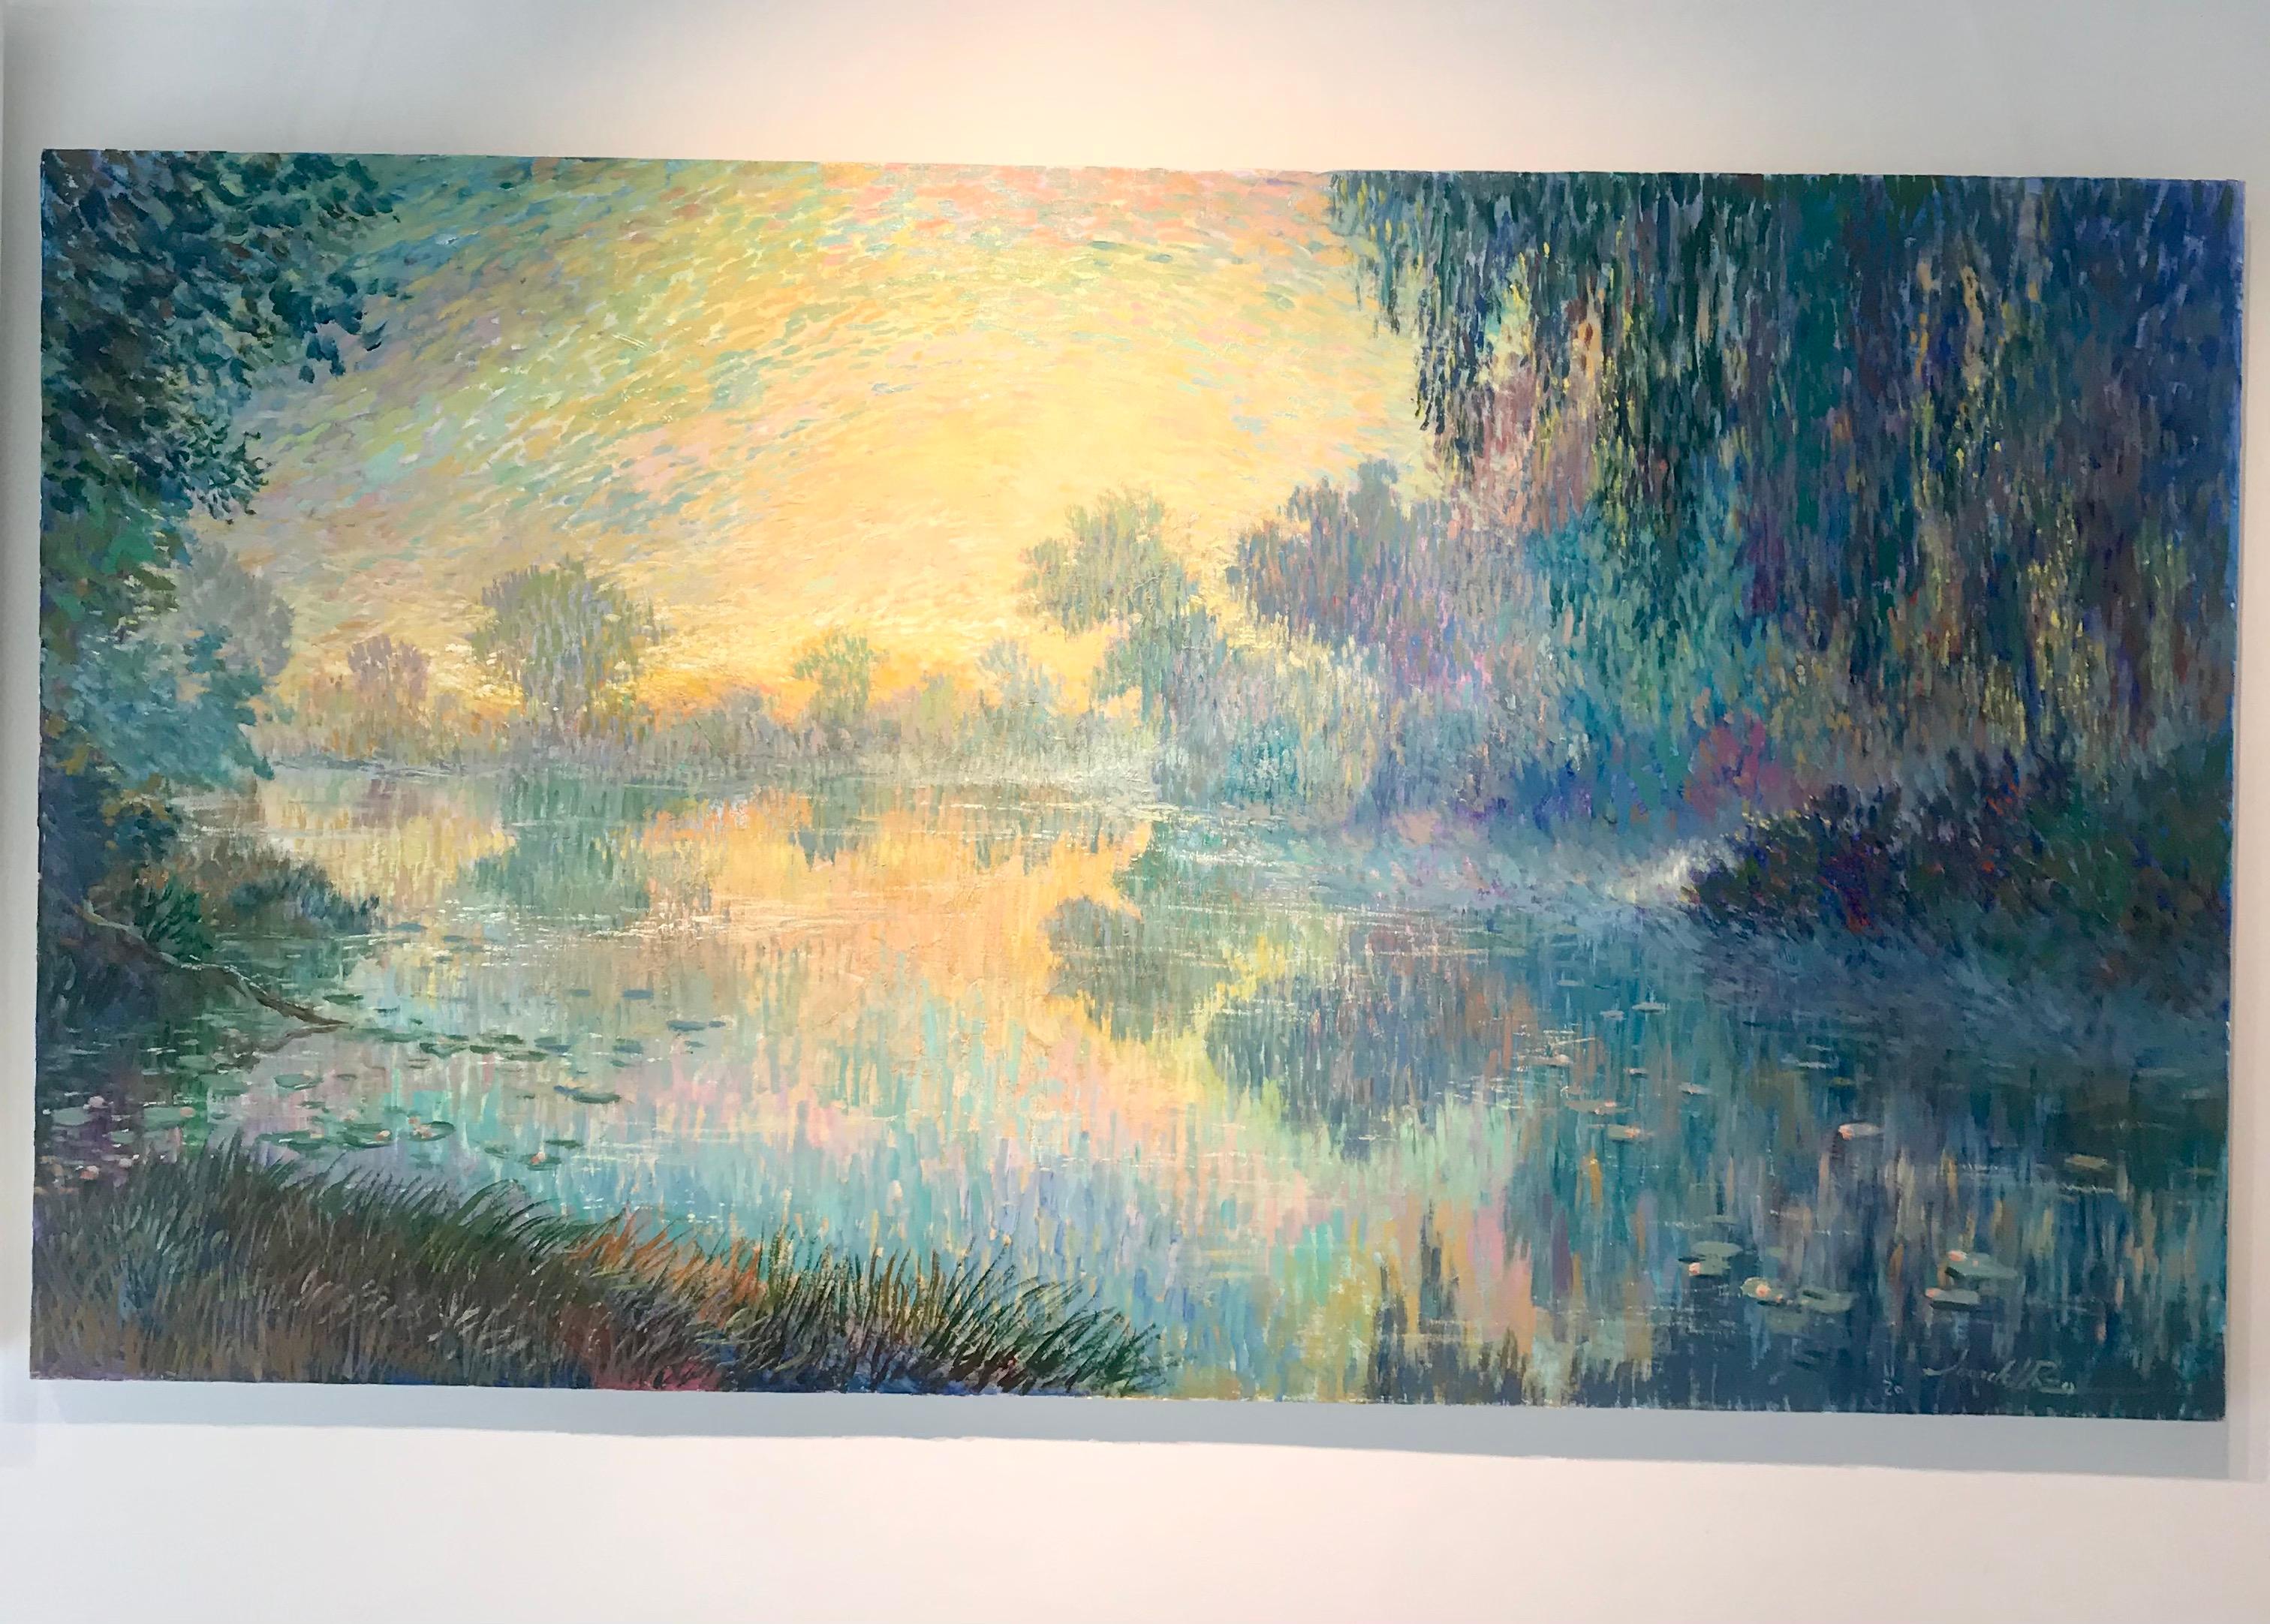 Reflecting Lights - Impressionist oil painting modern flora landscape waterscape - Painting by Juan del Pozo